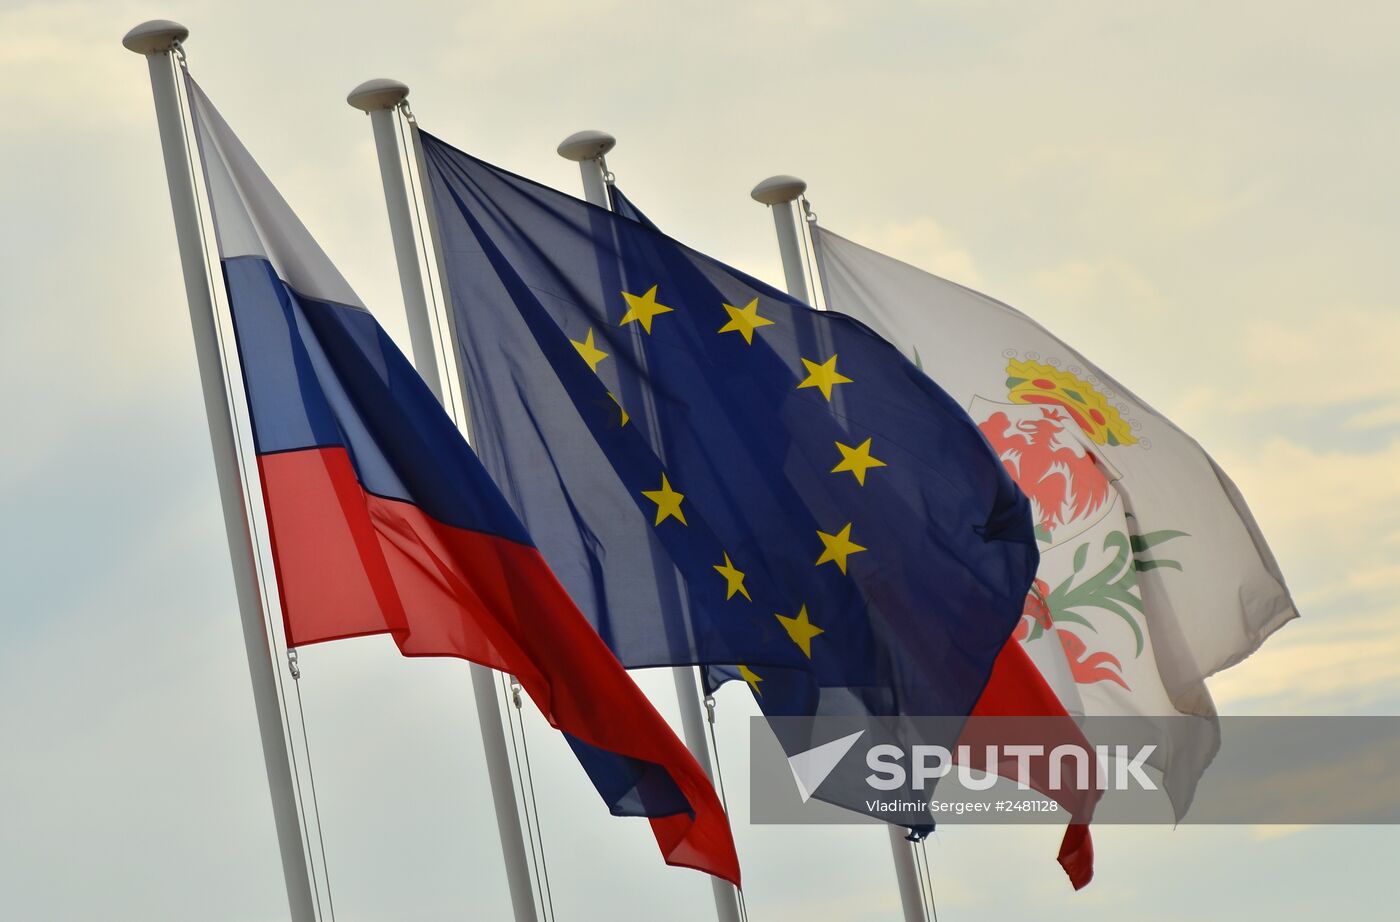 Flags of Russia, European Union, France and emblem of Nice on Nice embankment